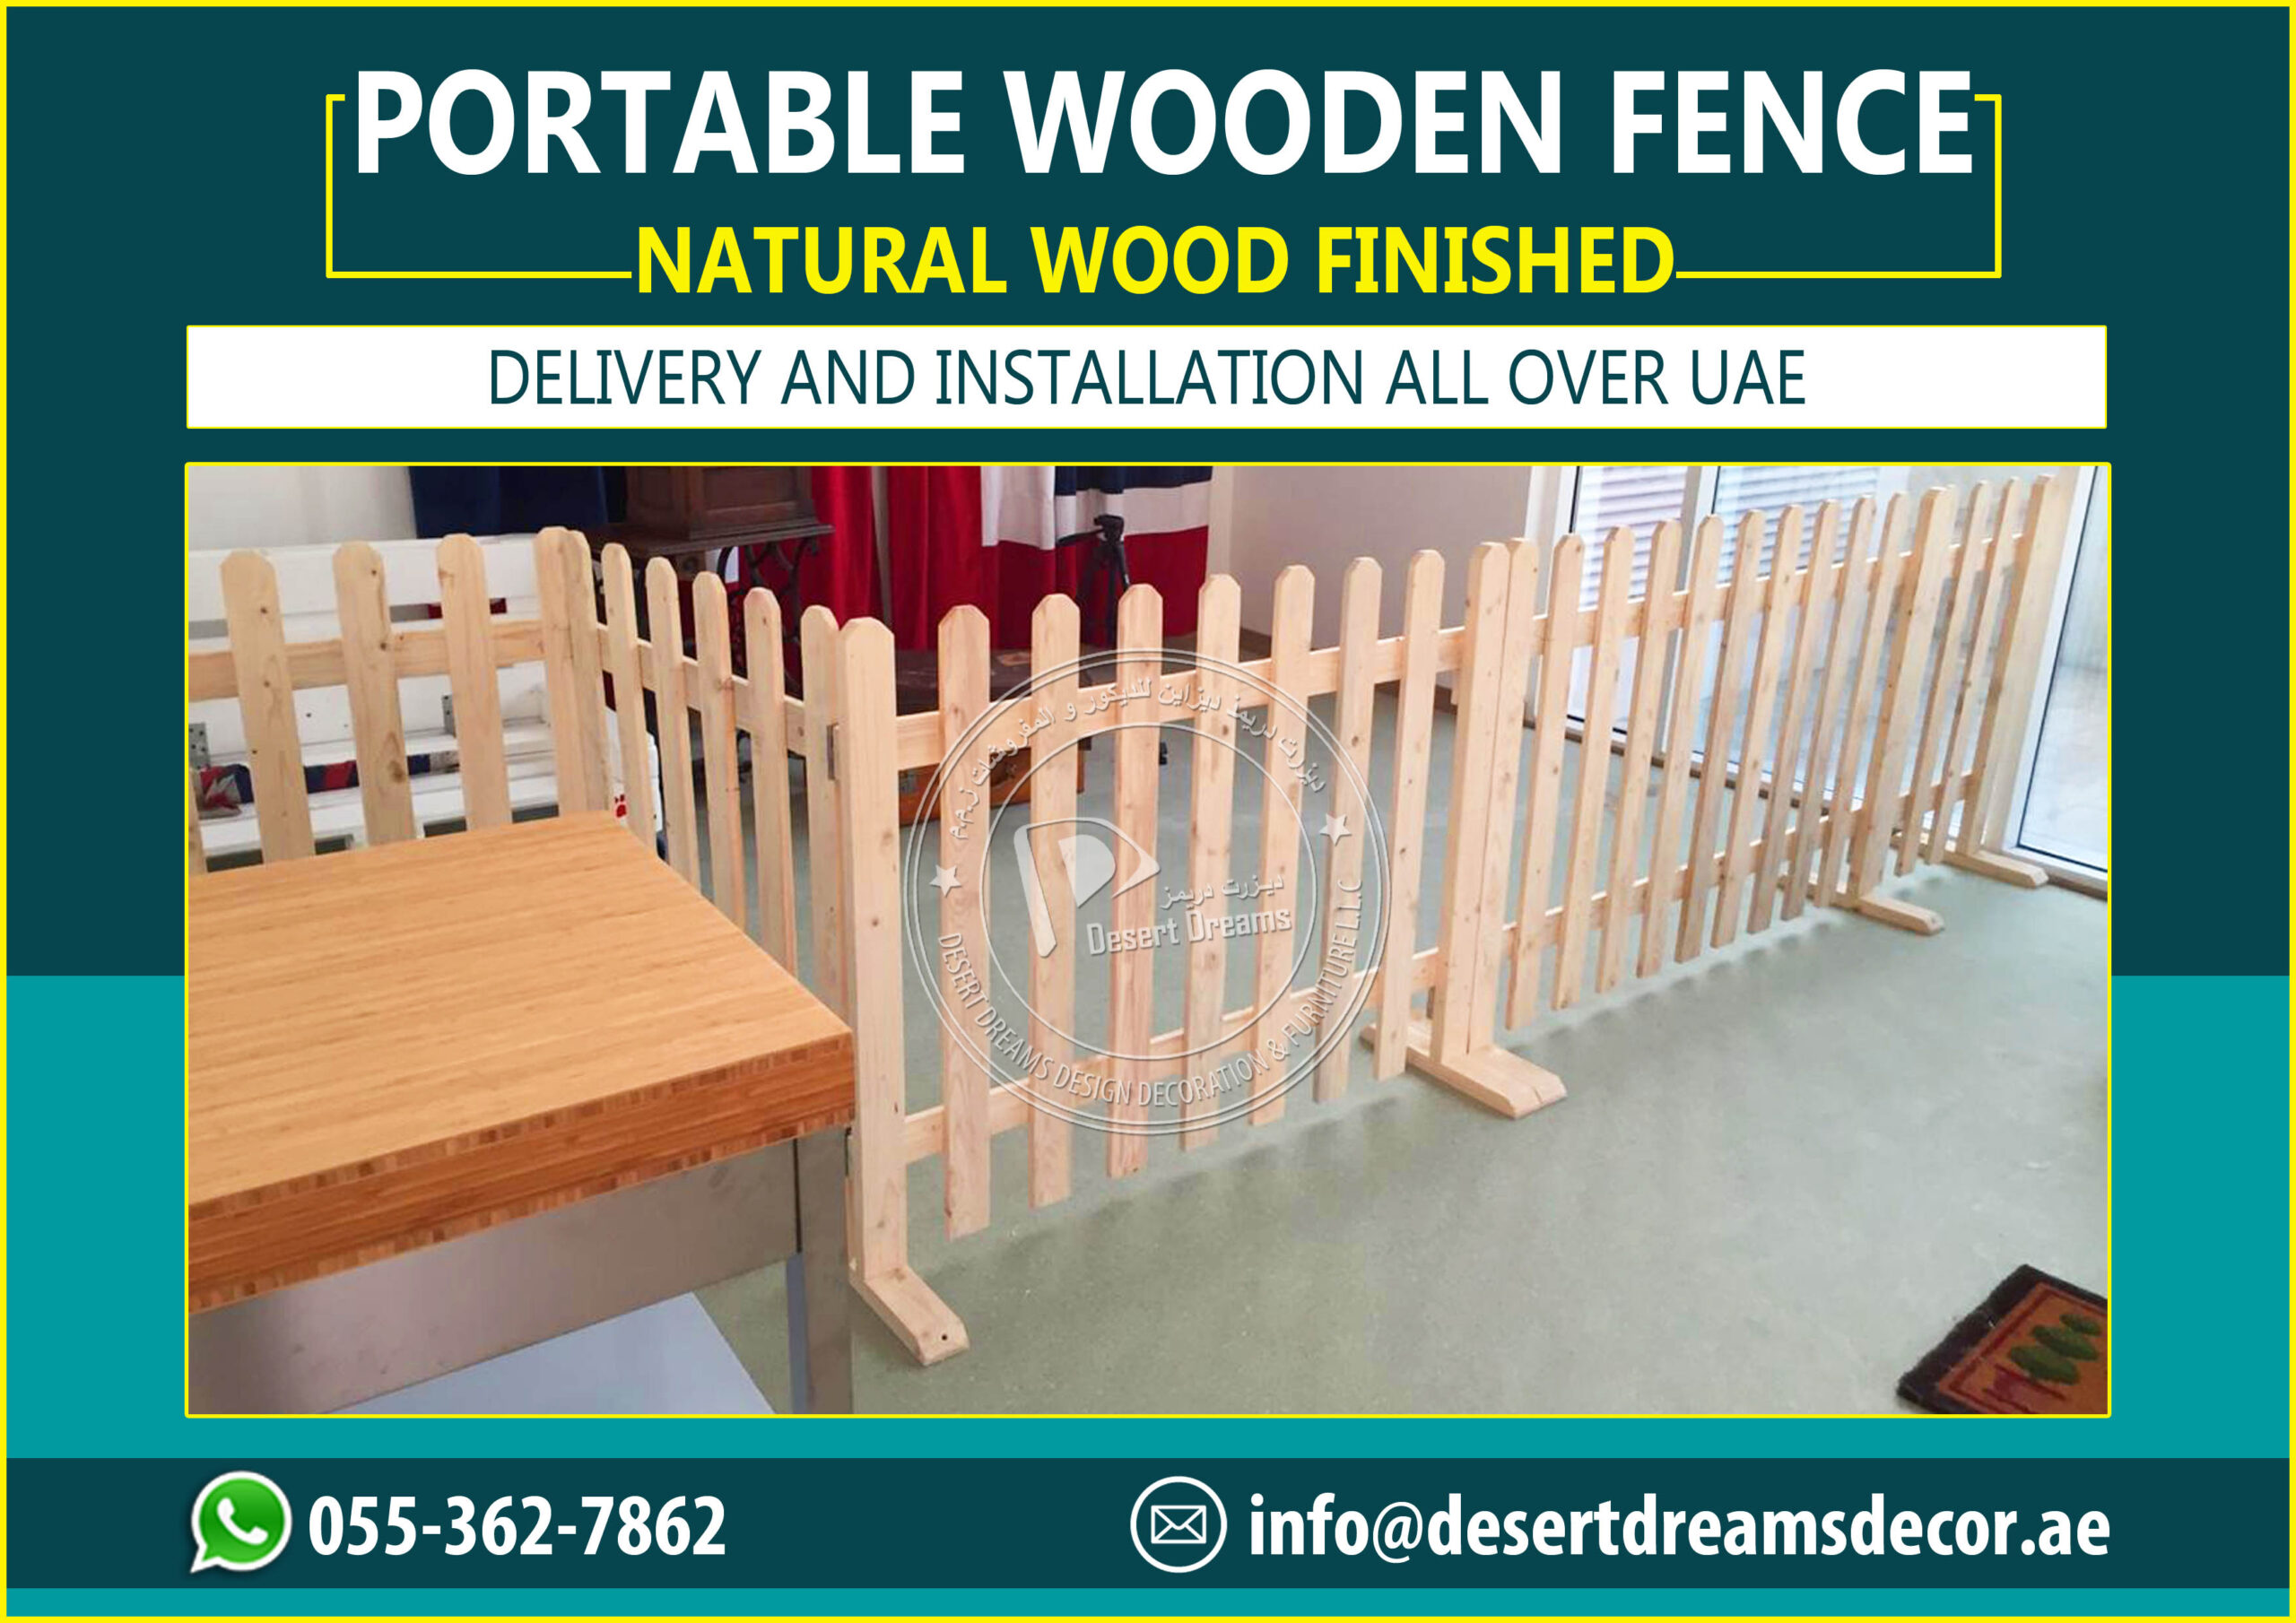 Events Fence Suppliers in Dubai | Free Standing Fence Uae.